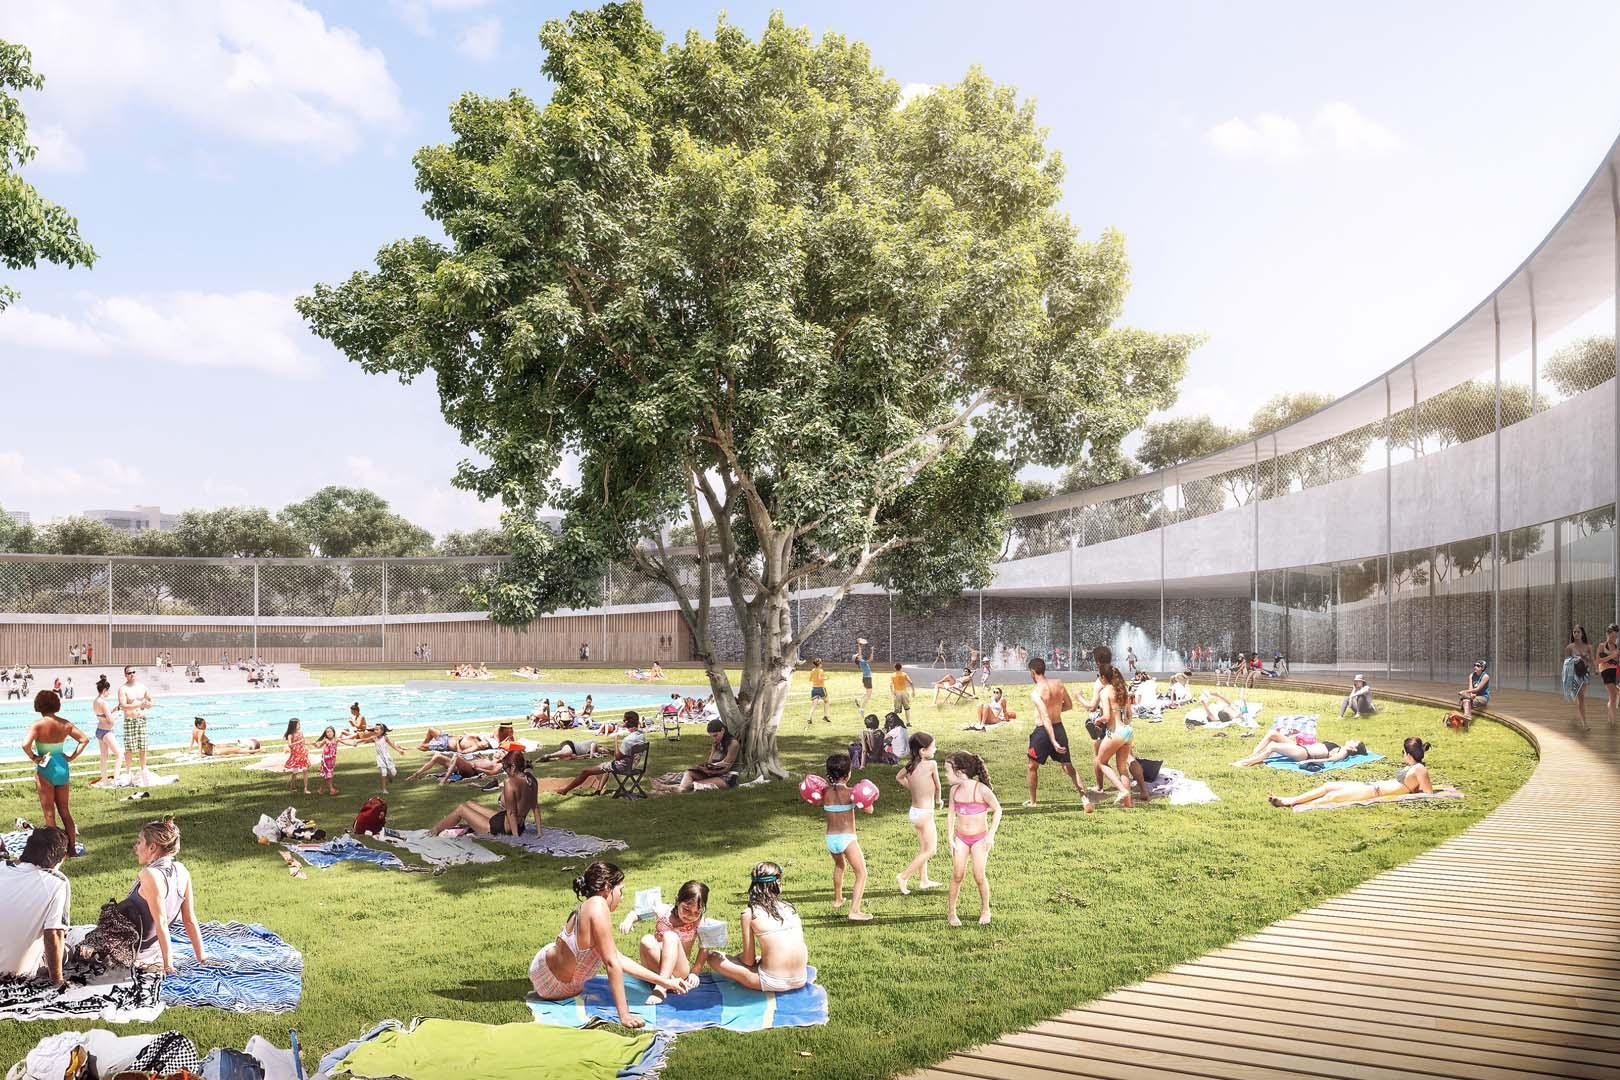 architects rendering of new City of Parramatta Aquatic Centre. Pictured is the circle structured admin and facilities building surround the 50m outdoor pool as bathers enjoy the new facilities on a sunny summer day. 